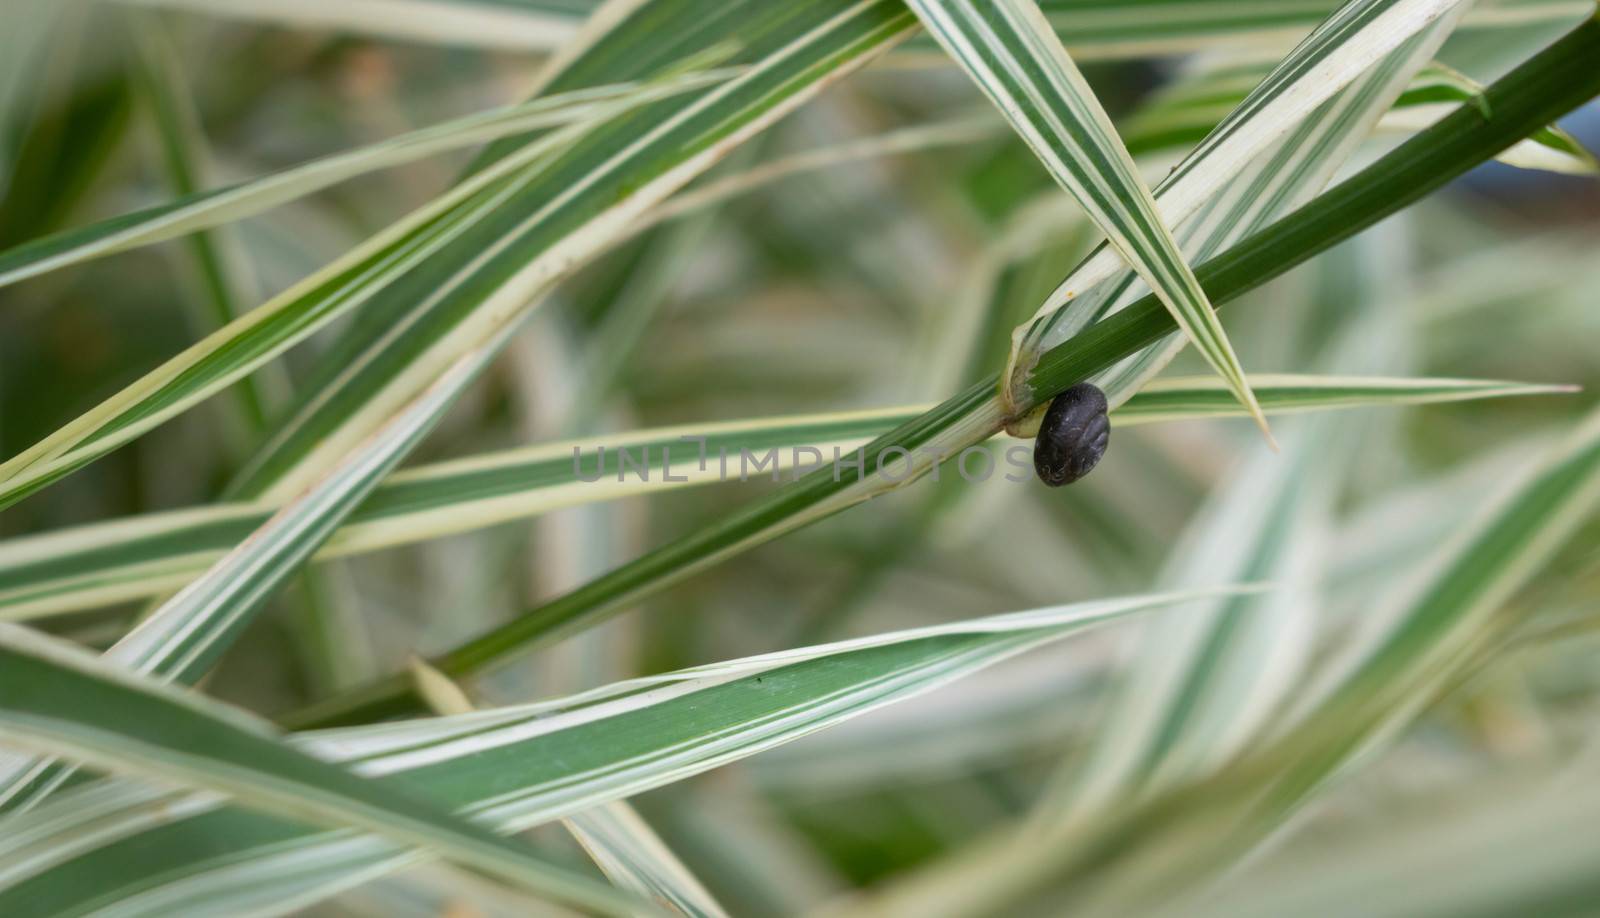 Small round snail on the leaves of Phalaris arundinacea, also known as reed Canary grass.